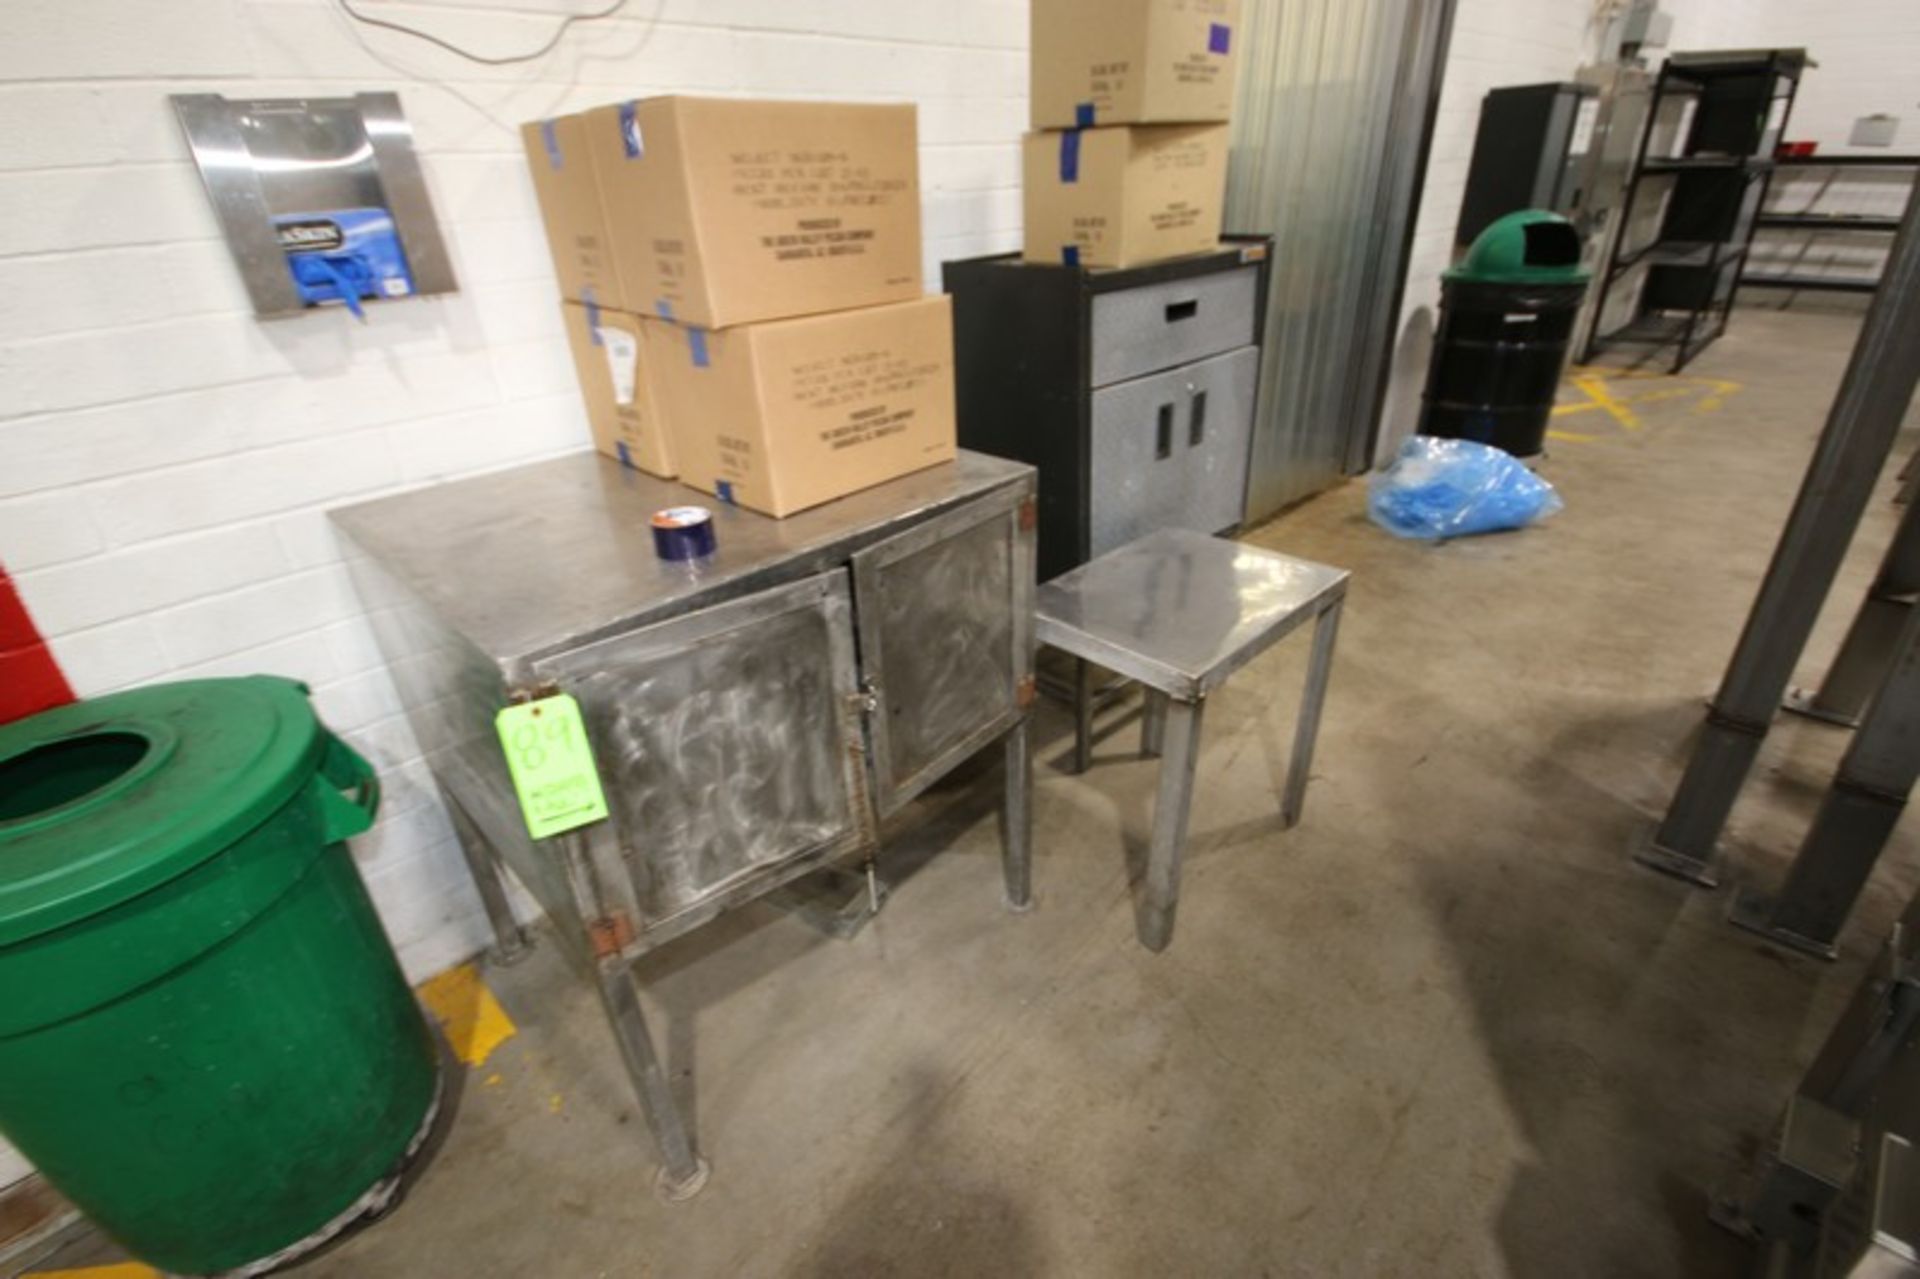 3-Pce. Lot Includes (1) S/S Double Door Cabinet, (1) Gladiator Cabinet Cabinet on S/S Stand, (1) S/S